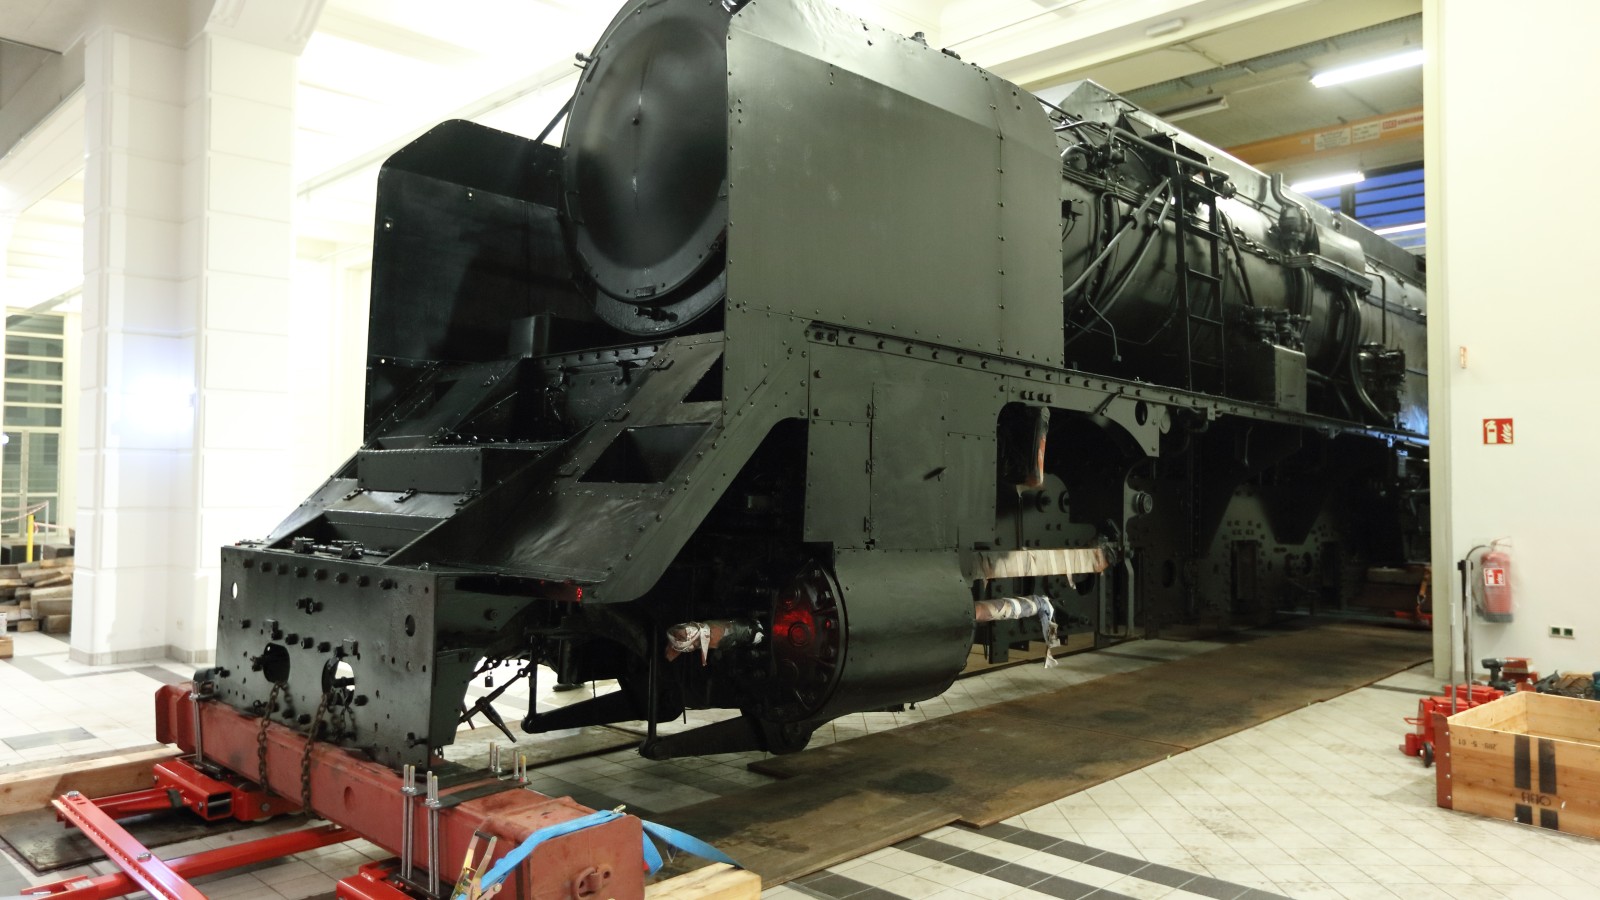 The 12.10 locomotive is transported from the TMW’s metalworking shop to the exhibition area of the museum